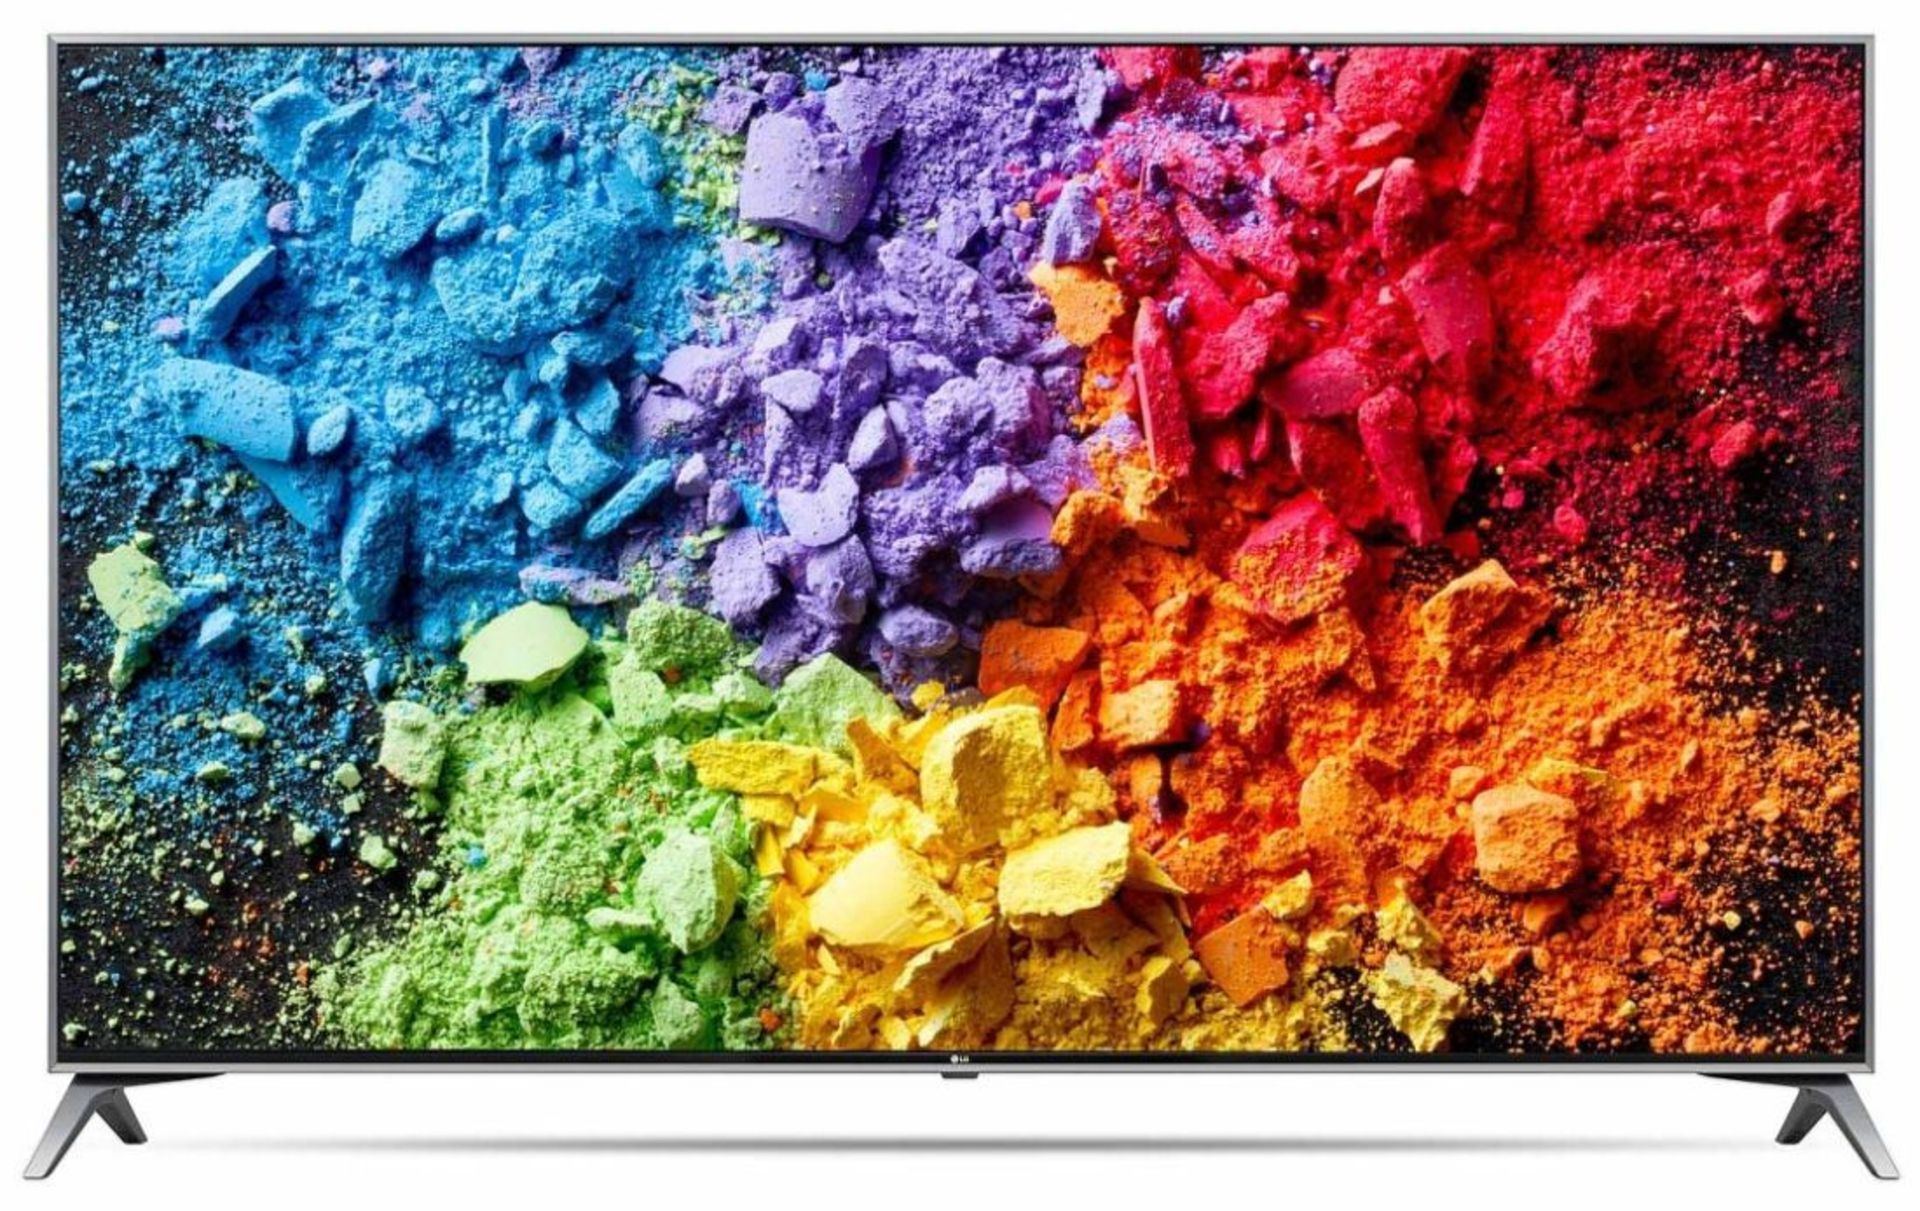 V Grade A LG 55 Inch ACTIVE HDR 4K SUPER ULTRA HD LED SMART TV WITH FREEVIEW HD & WEBOS 3.5 &